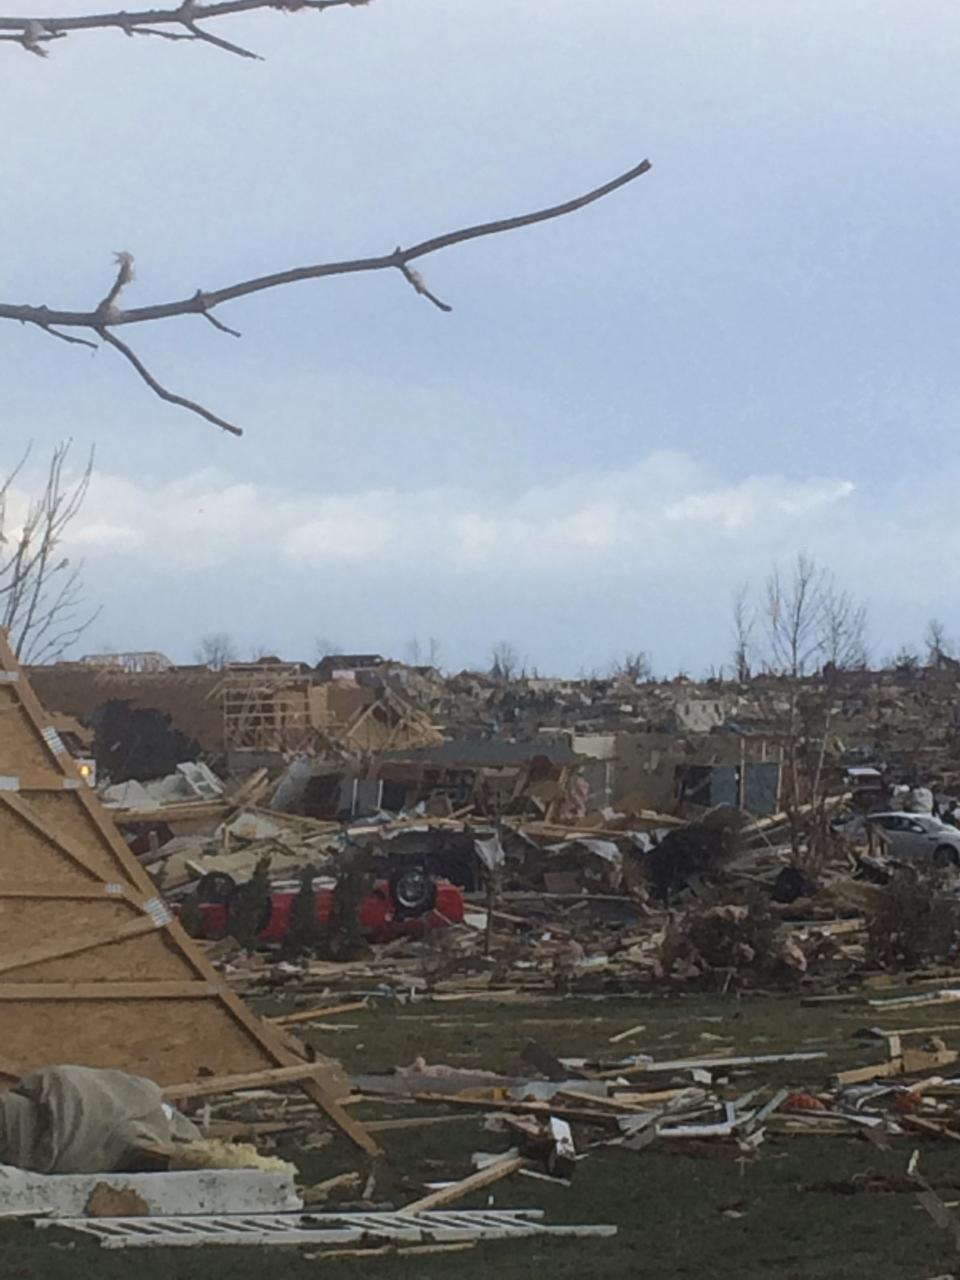 Extensive damage to homes and vehicles is pictured aftermath of tornado that touched down in Washington Illinois